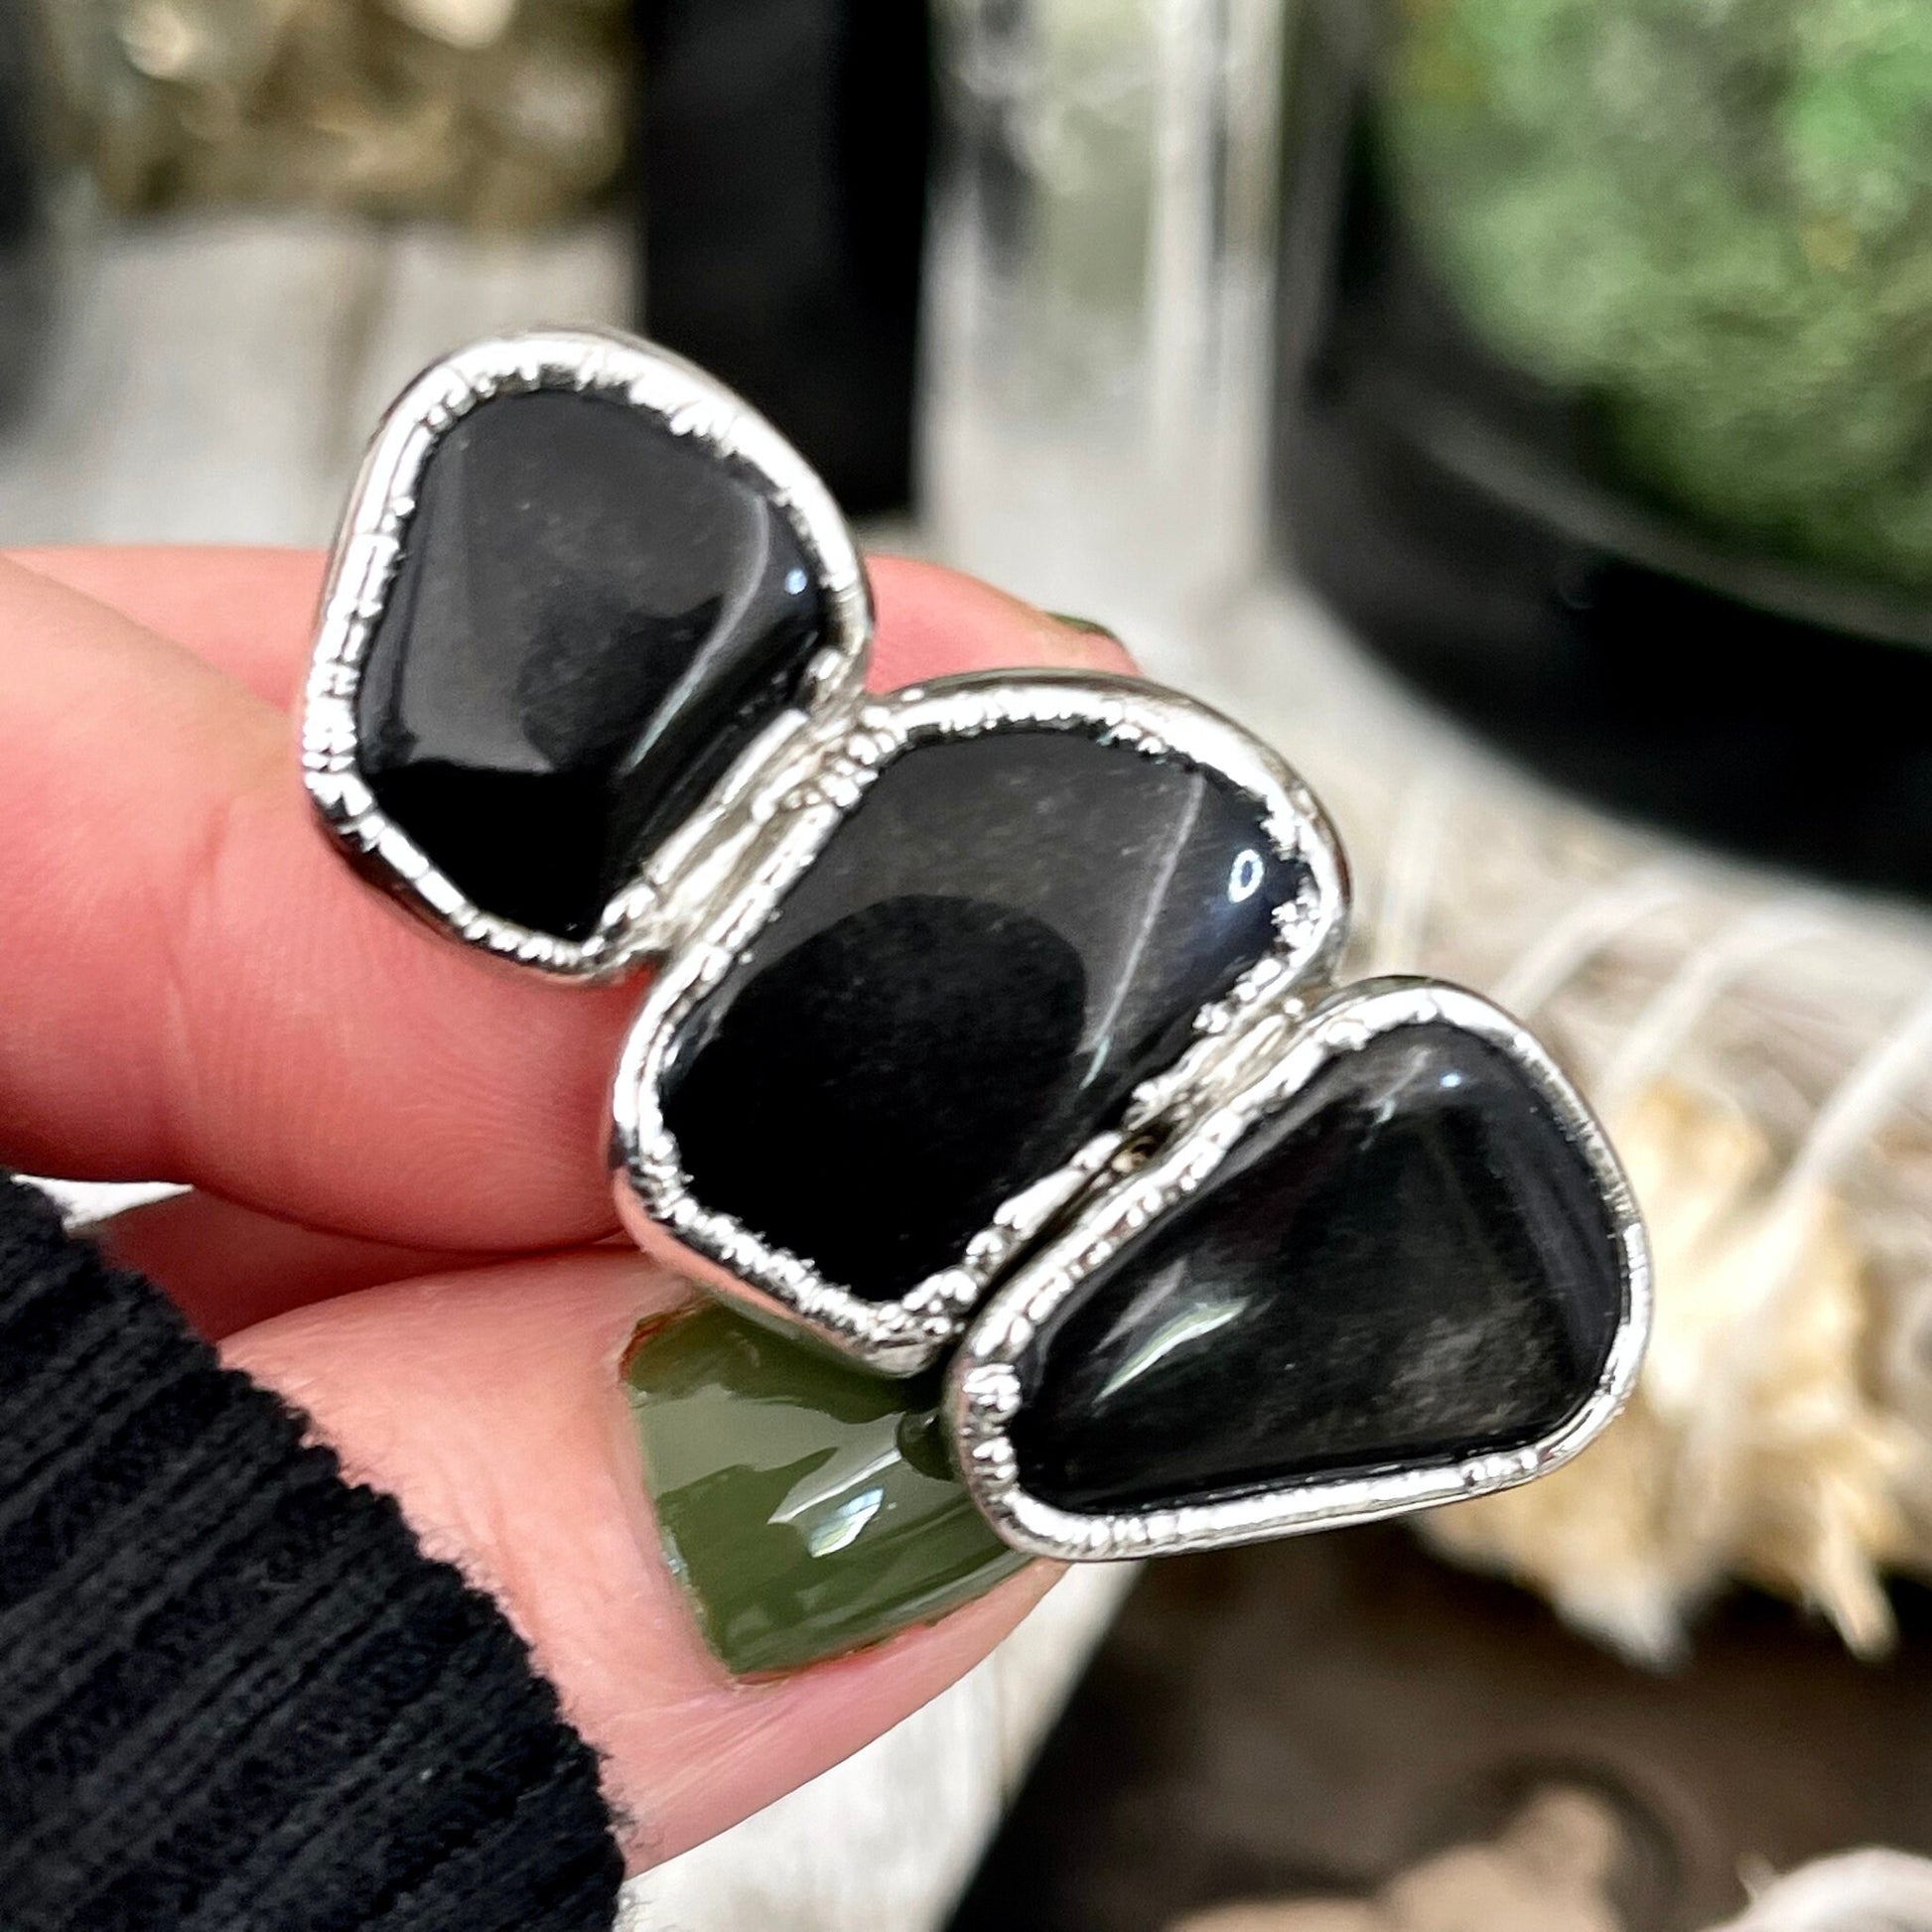 Size 8 Crystal Ring - Three Stone Ring Black Onyx Ring in Silver / Foxlark Collection - One of a Kind / Big Crystal Jewelry Goth Witchy Ring